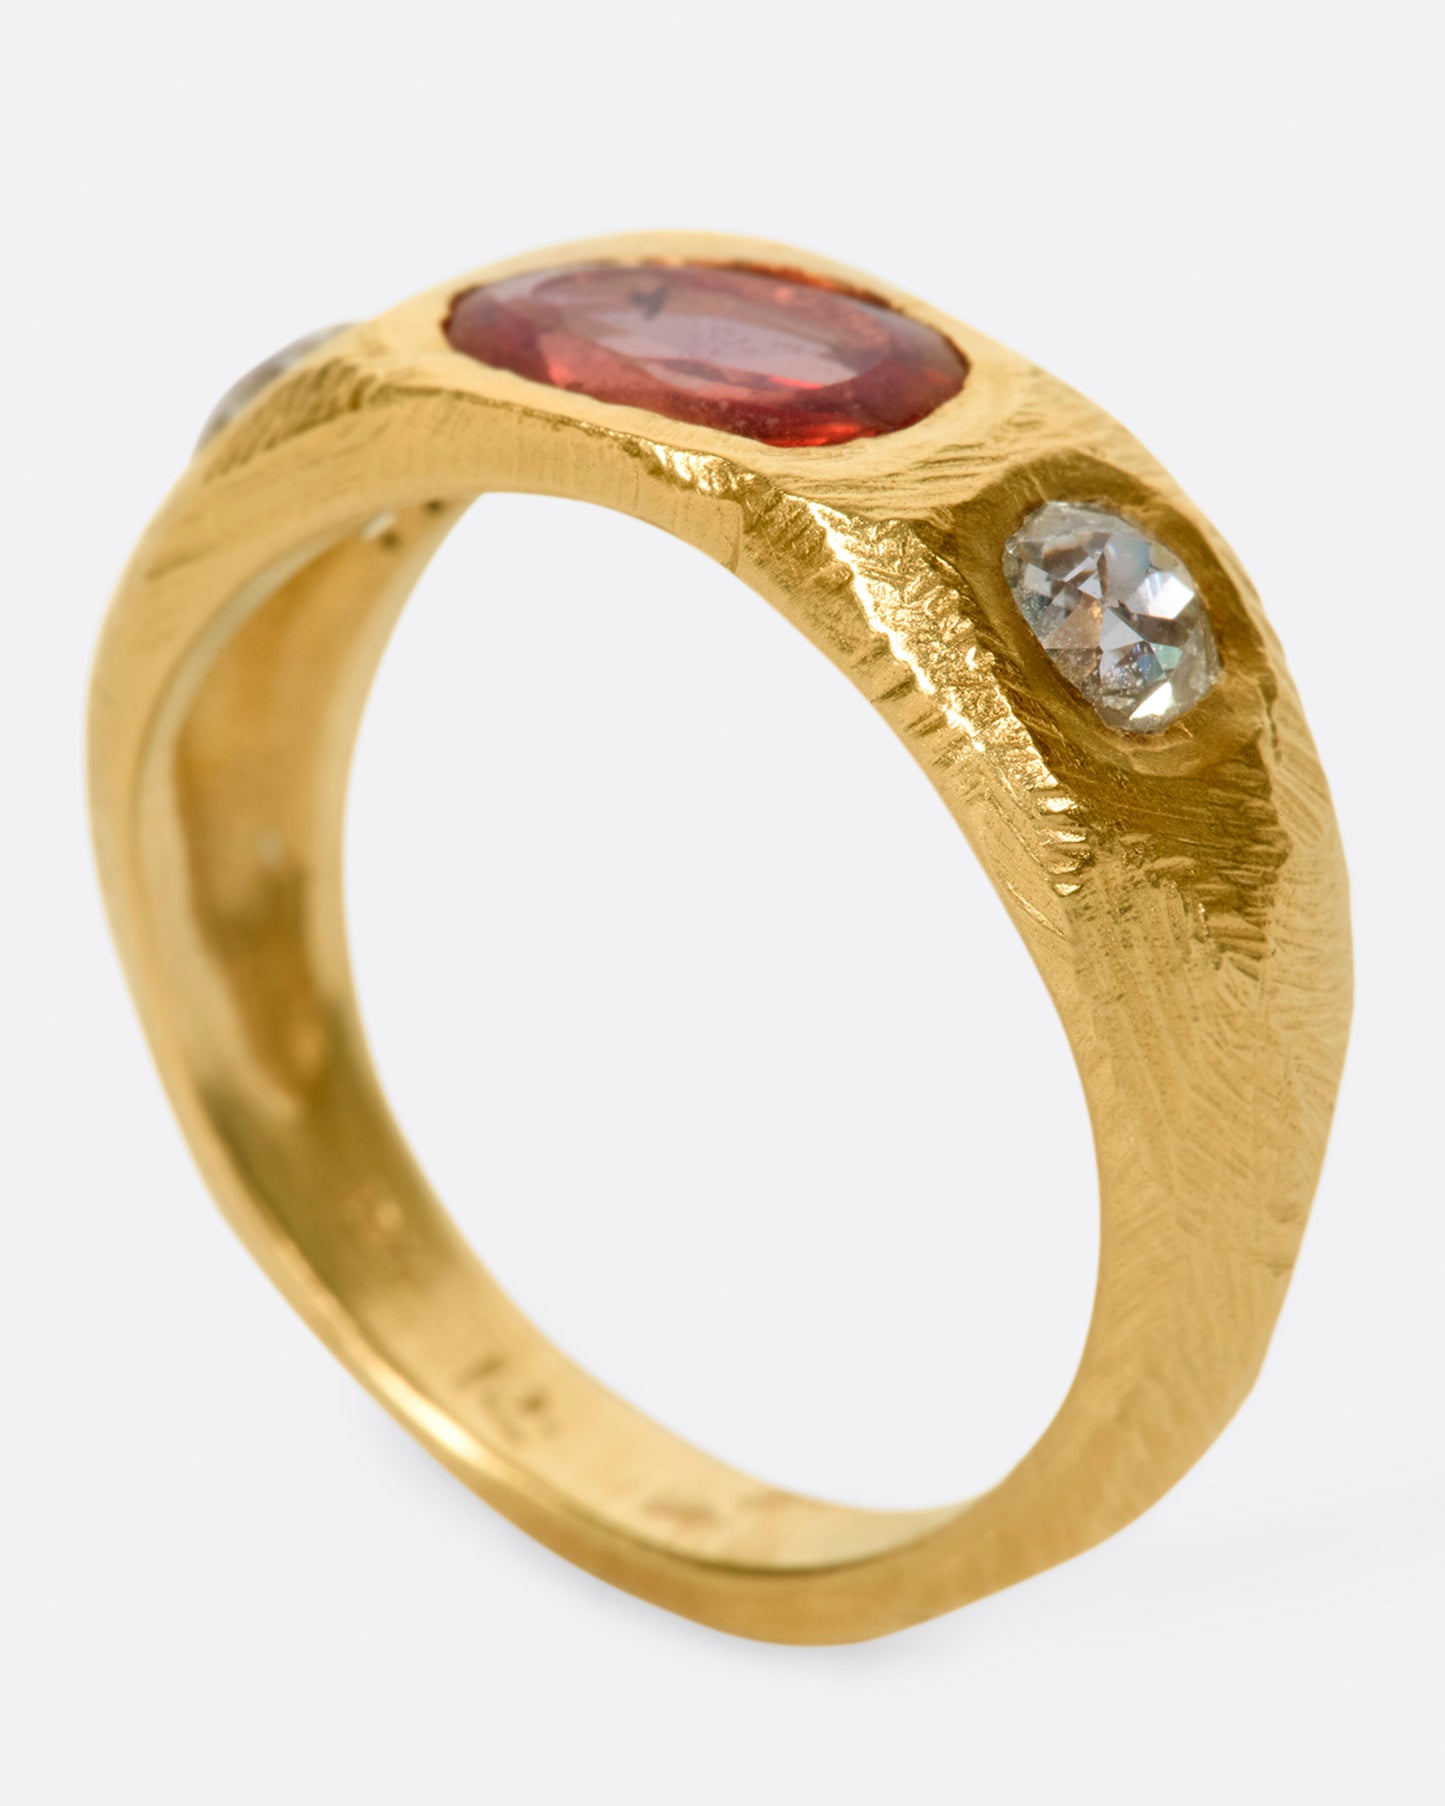 A one of a kind, hand carved ring with an oval rose cut orange sapphire and old mind cut white diamonds on either side.